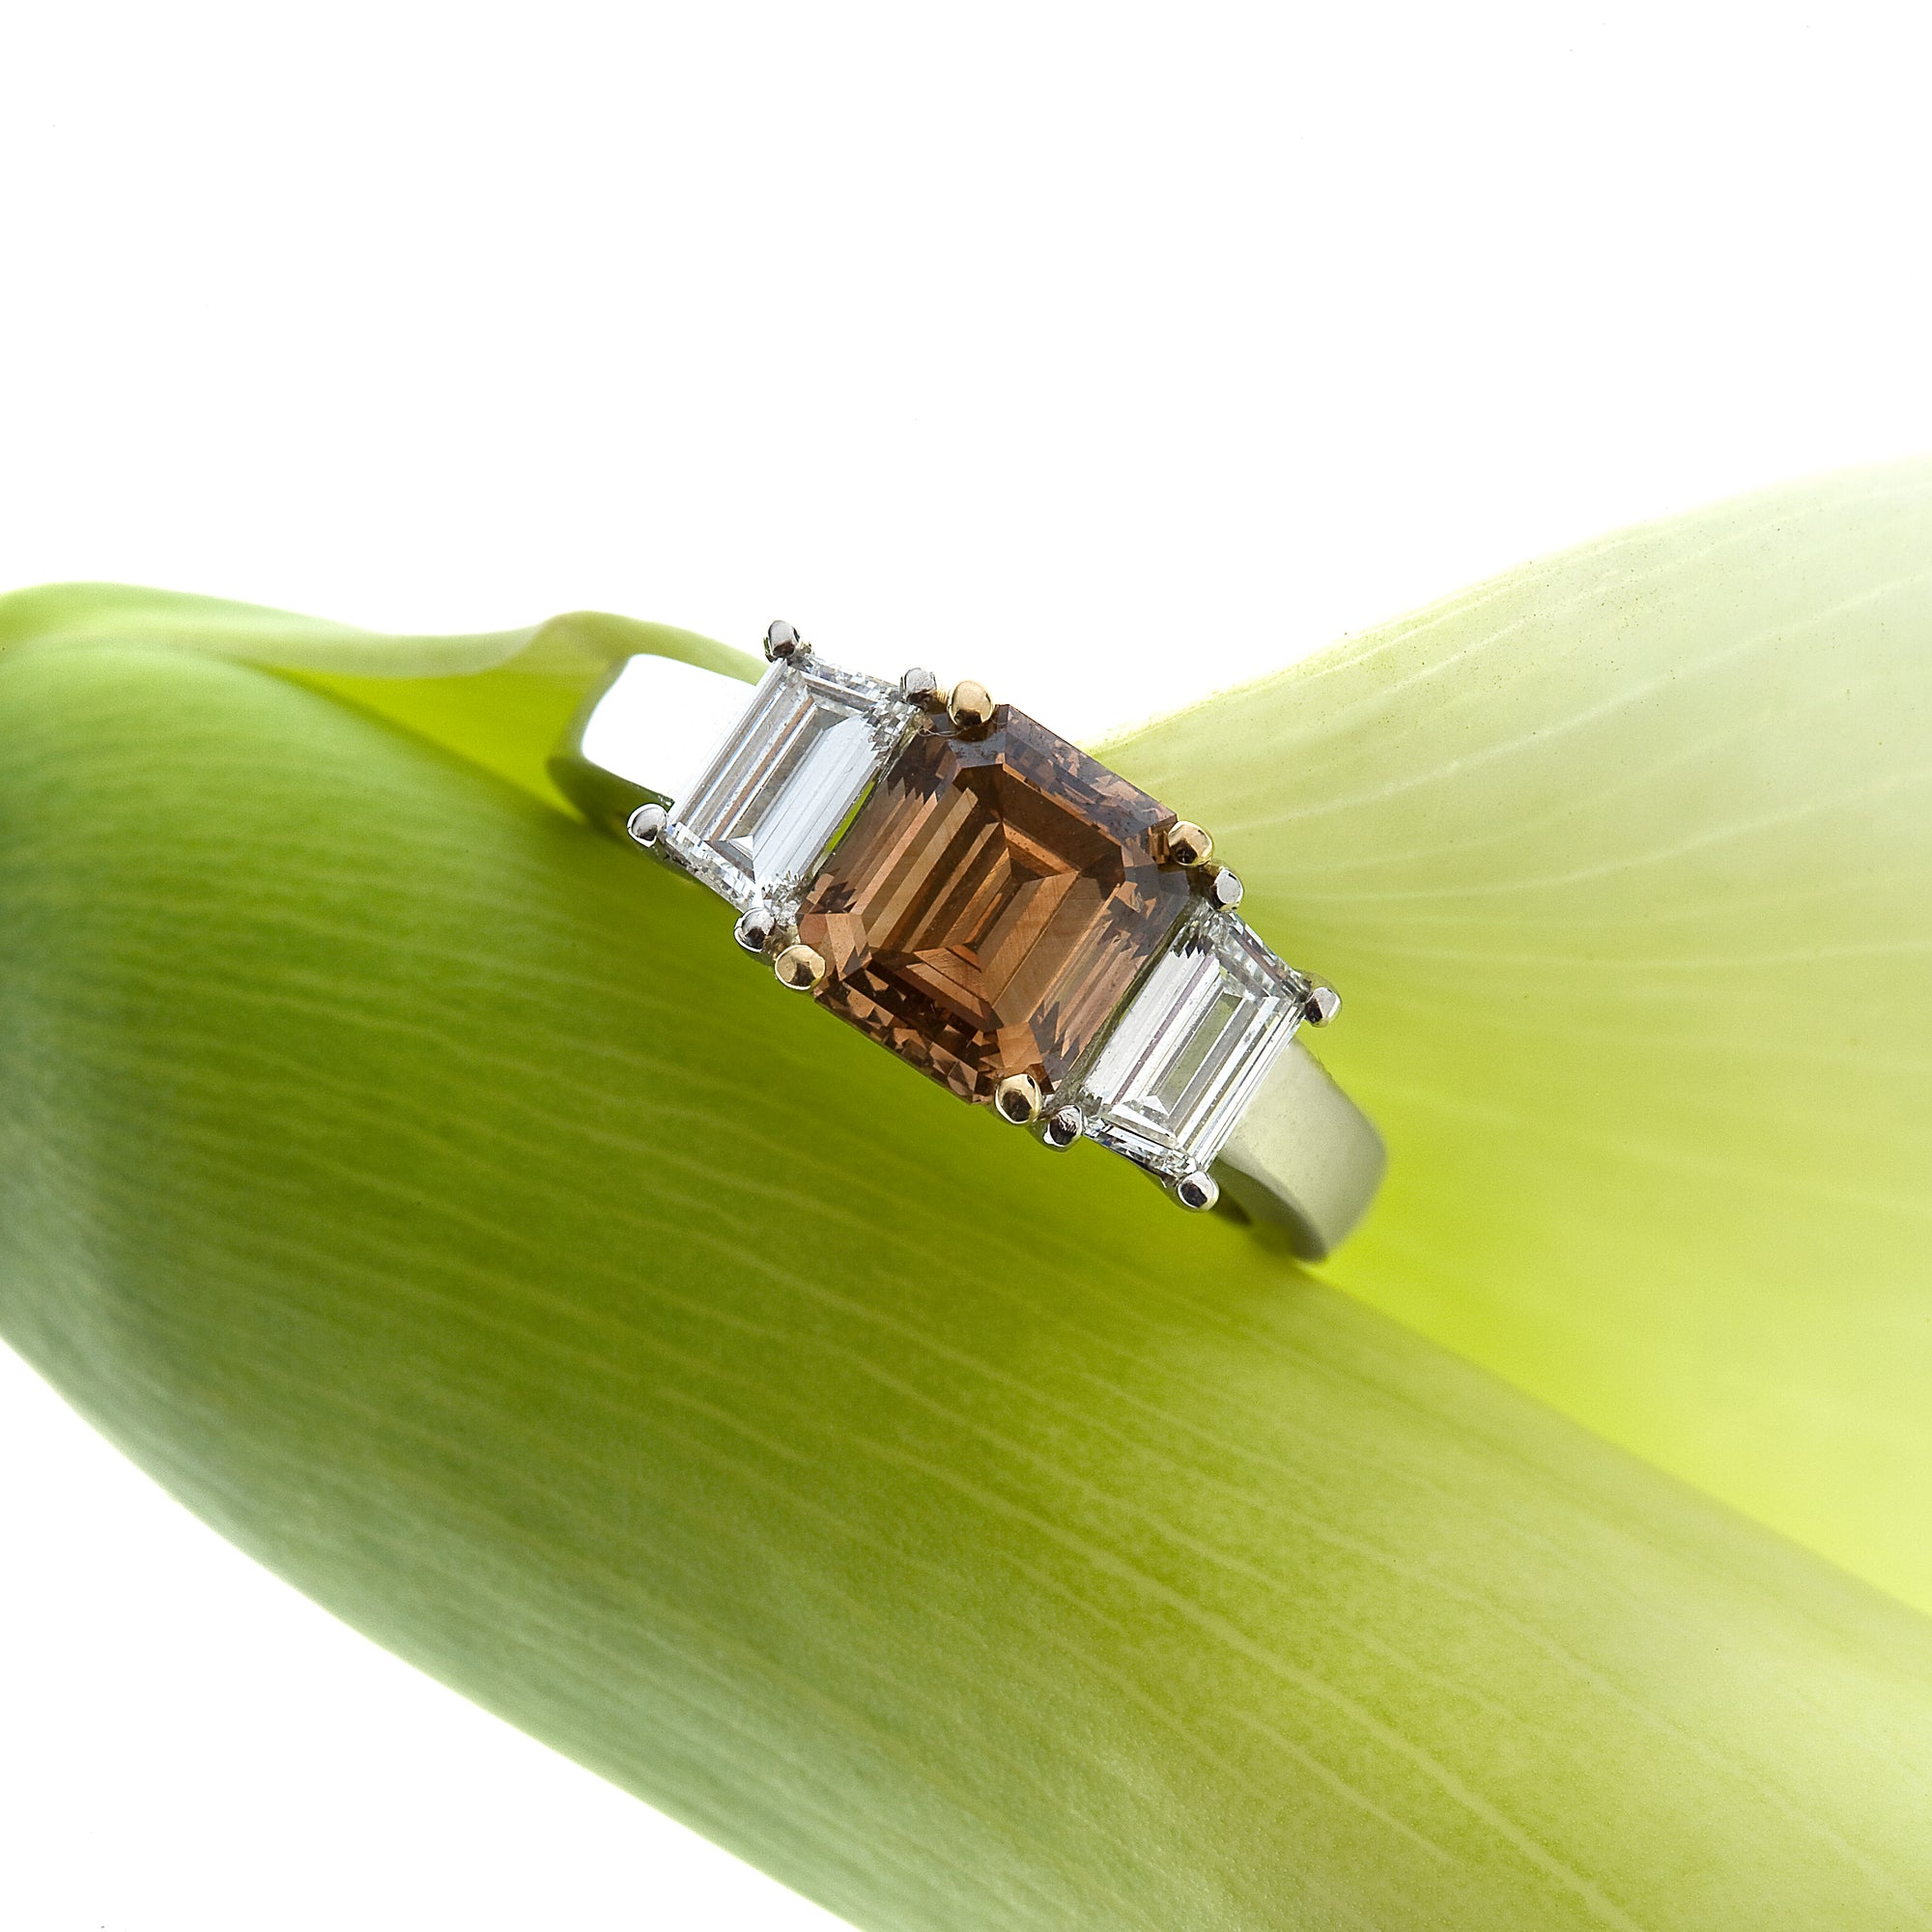 18K gold diamond engagement ring featuring 1 emerald-cut cognac diamond in a 14K yellow gold 4-prong setting, and 2 trapezoid diamonds in a 3-stone design. Judith Arnell Jewelers